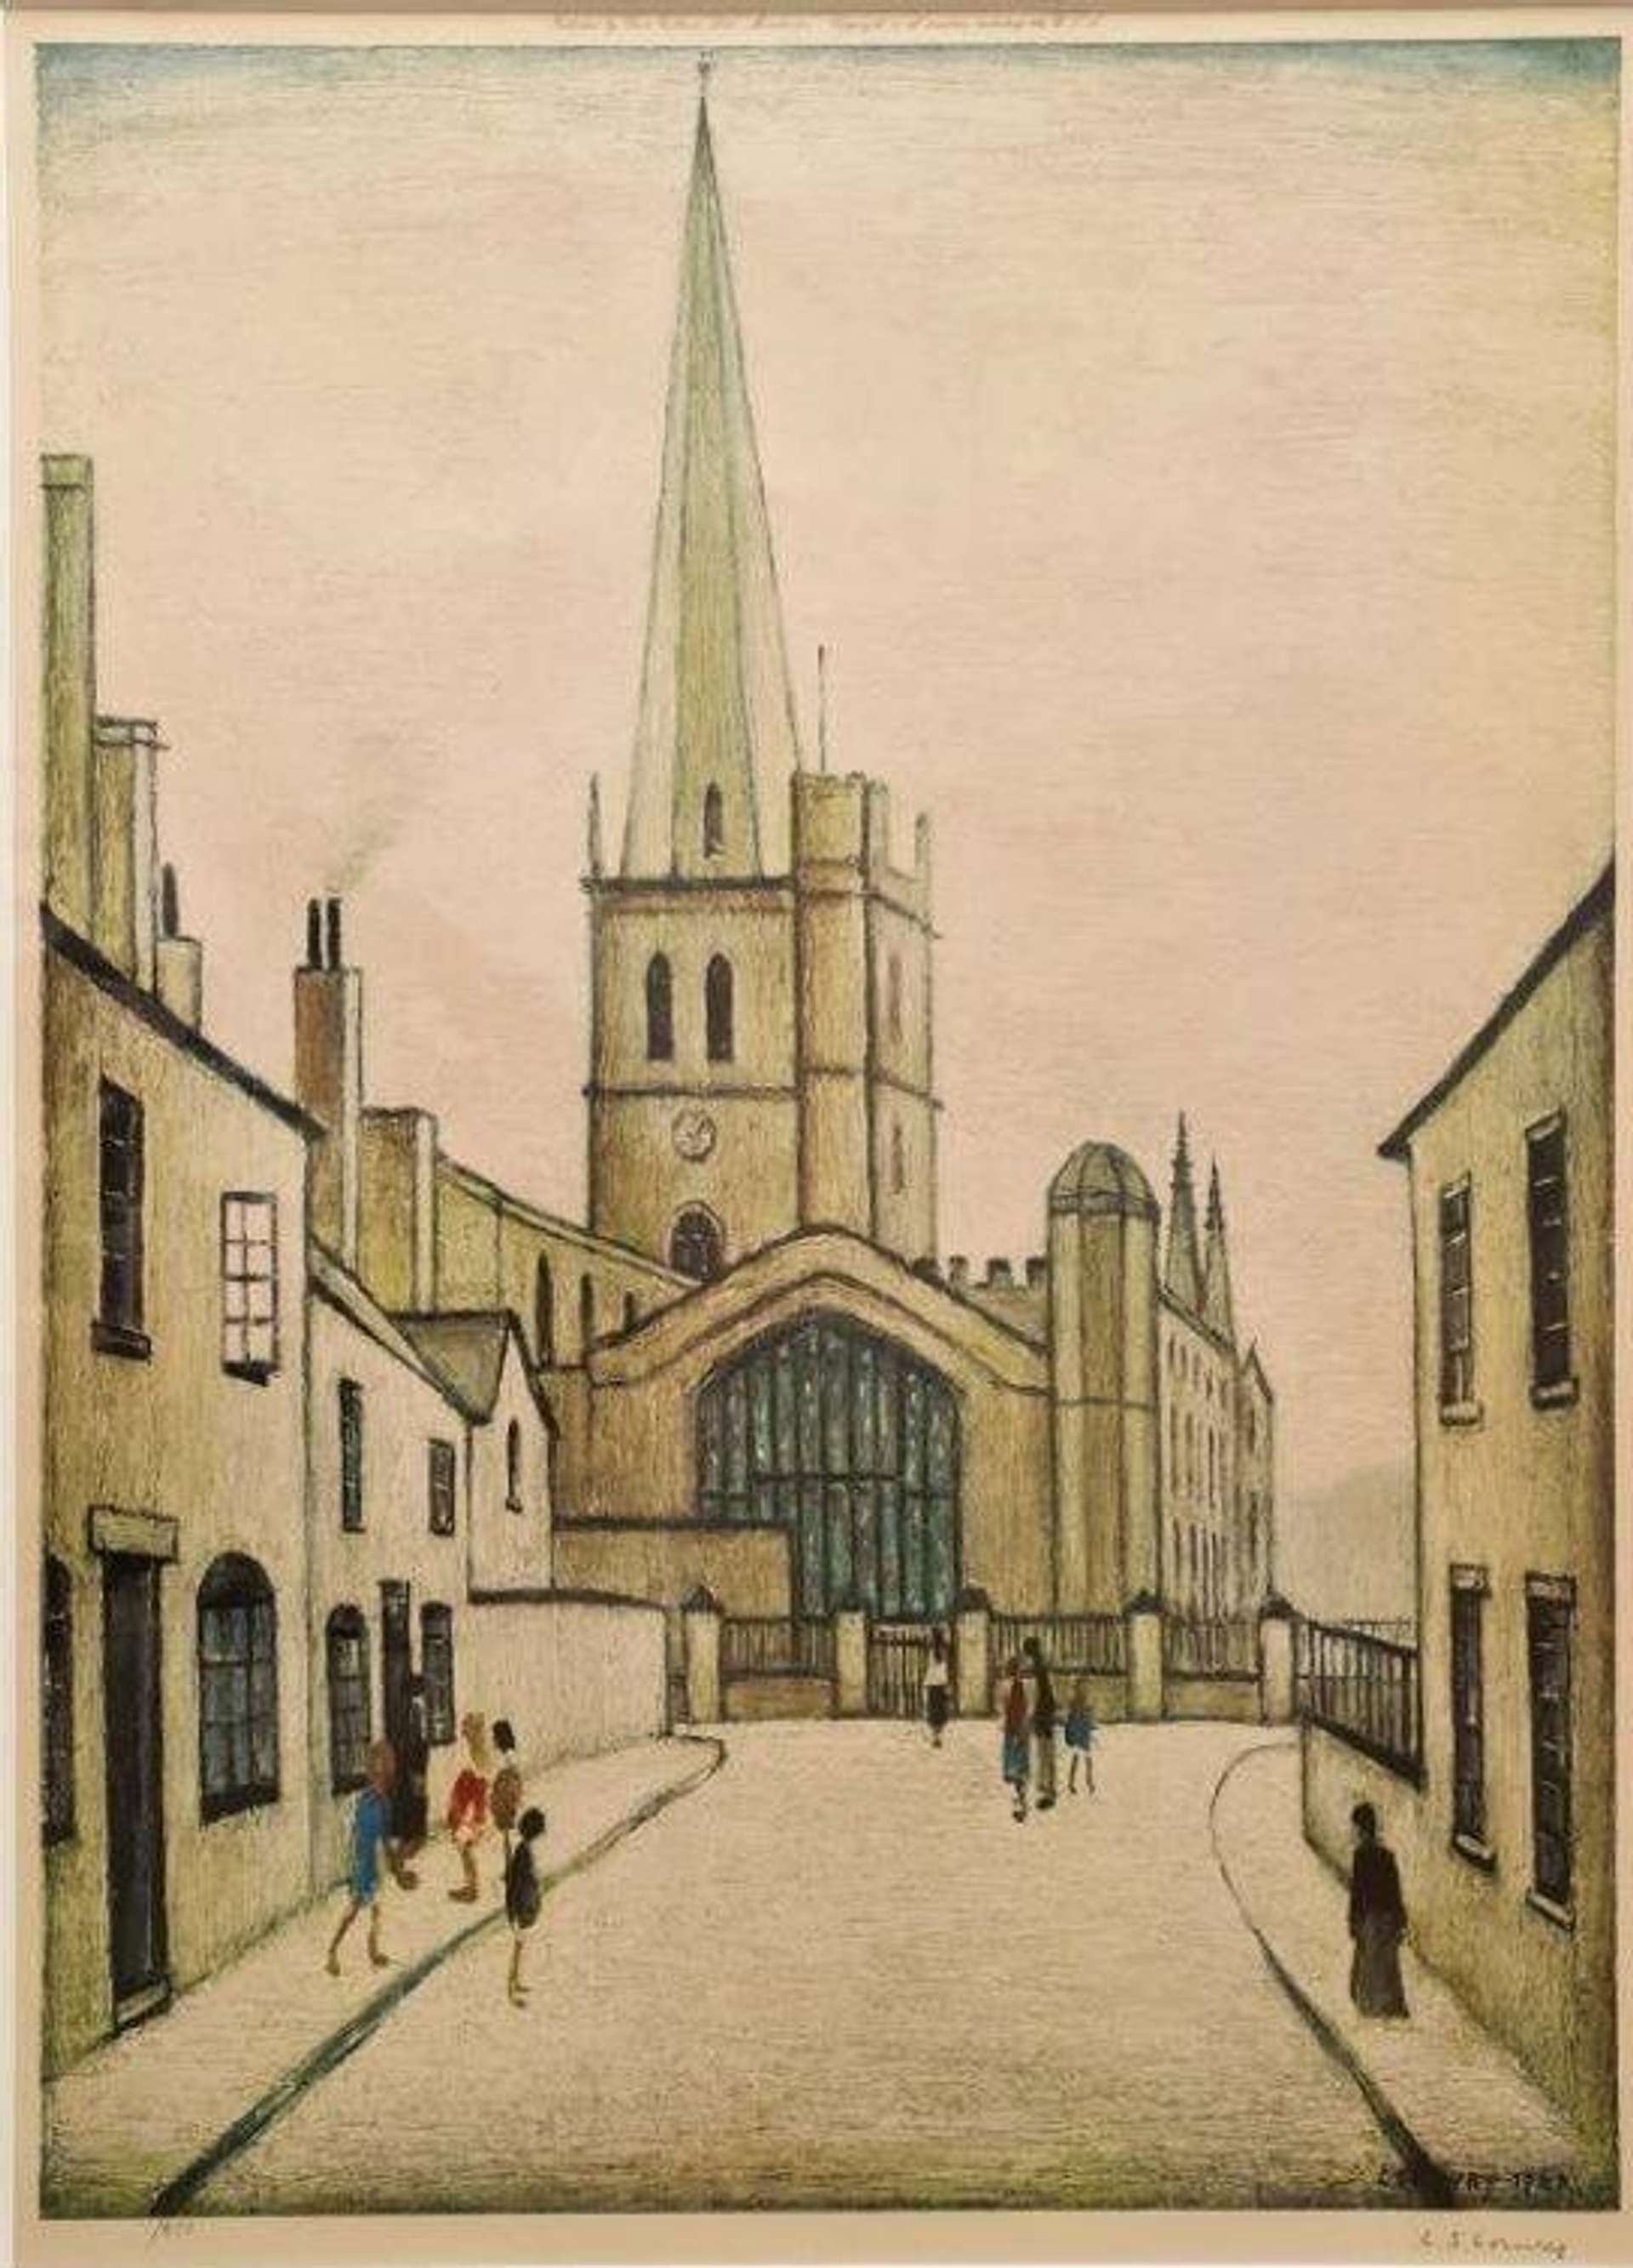 L.S. Lowry’s Burford Church. A lithograph of a landscape portrait of a church on a local street. L.S. Lowry’s Burford Church. A lithograph of a landscape portrait of a church on a local street. 